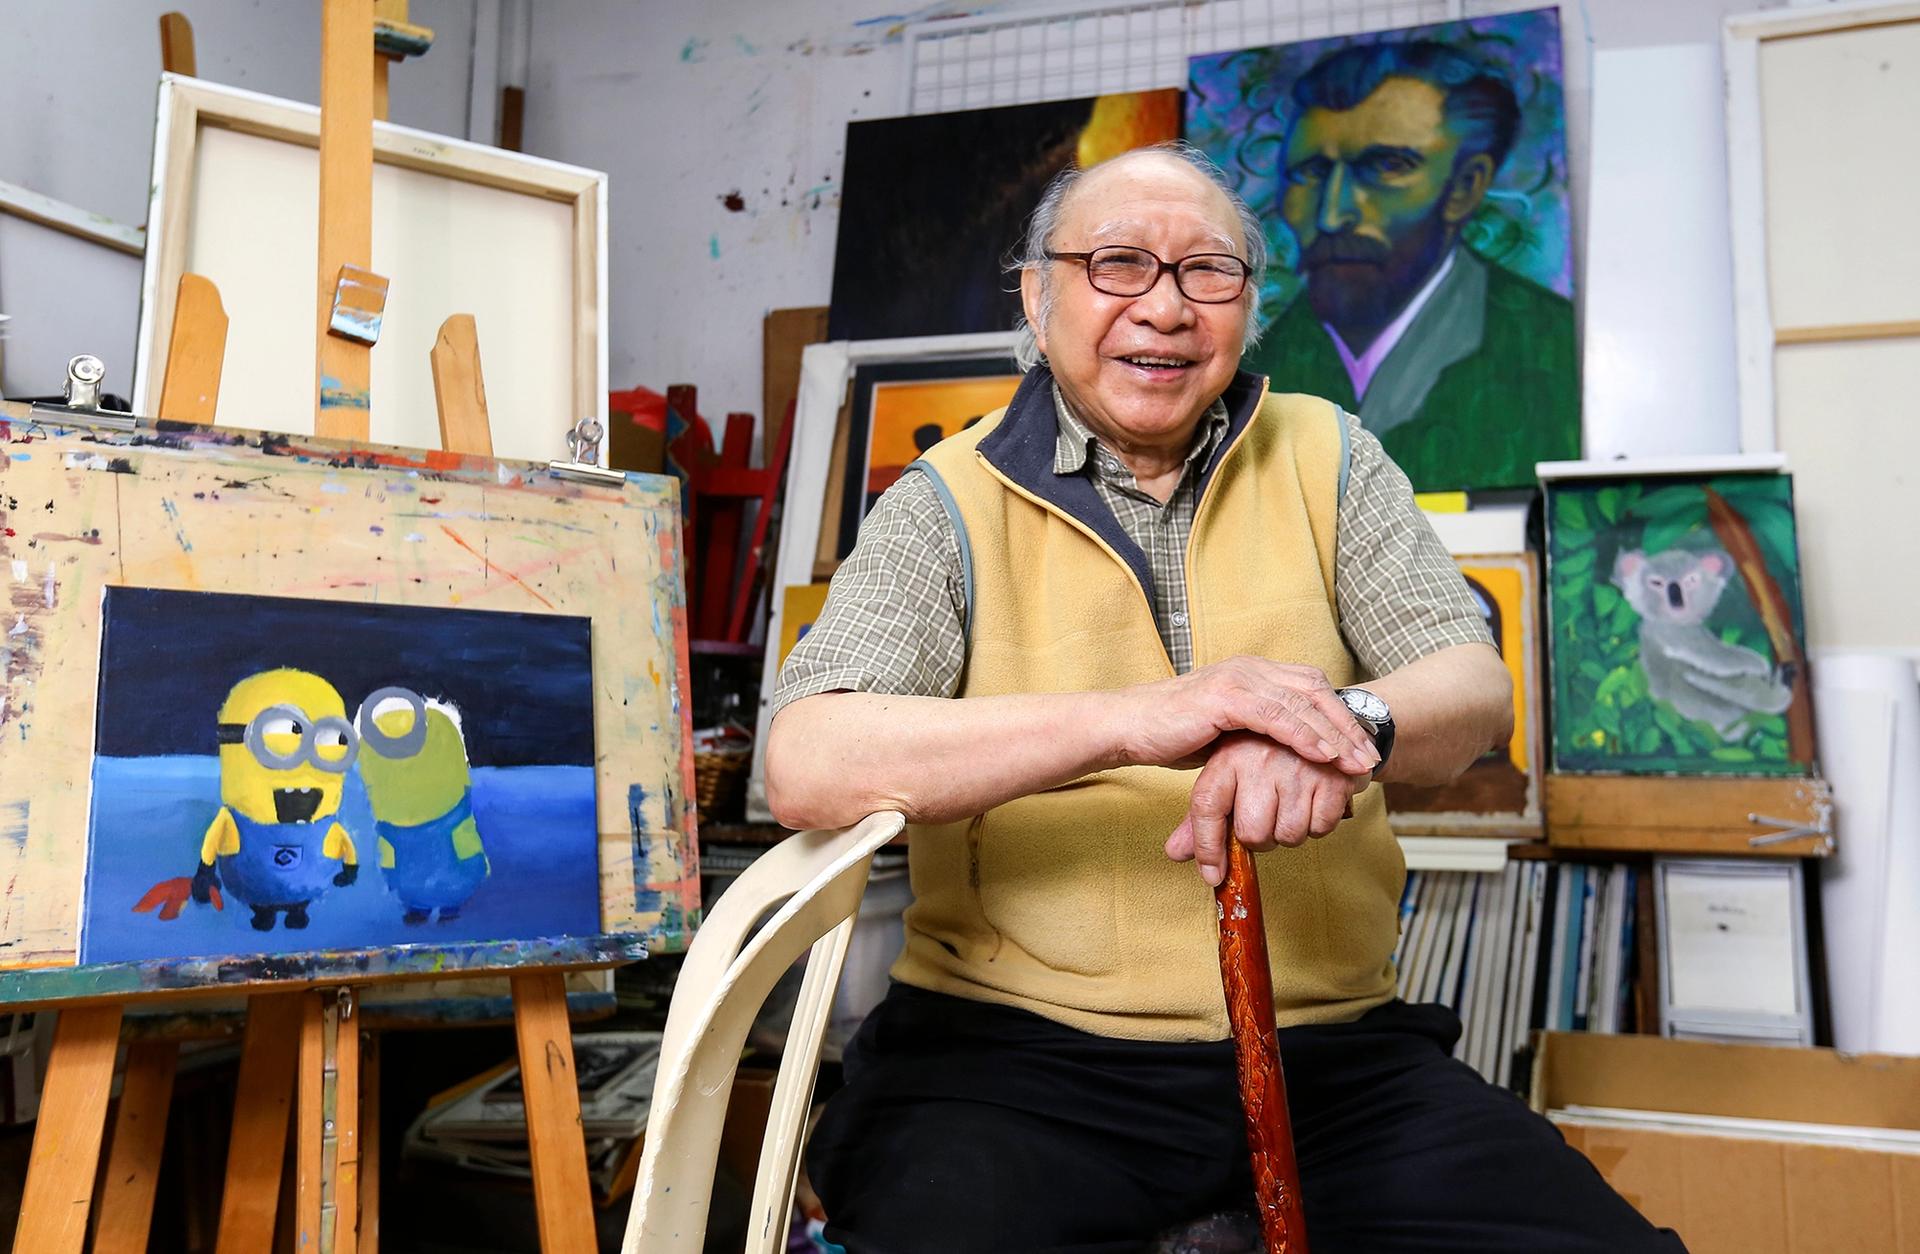 Hong Kong artist Gaylord Chan has died aged 95 Photo by Edmond So/South China Morning Post via Getty Images)